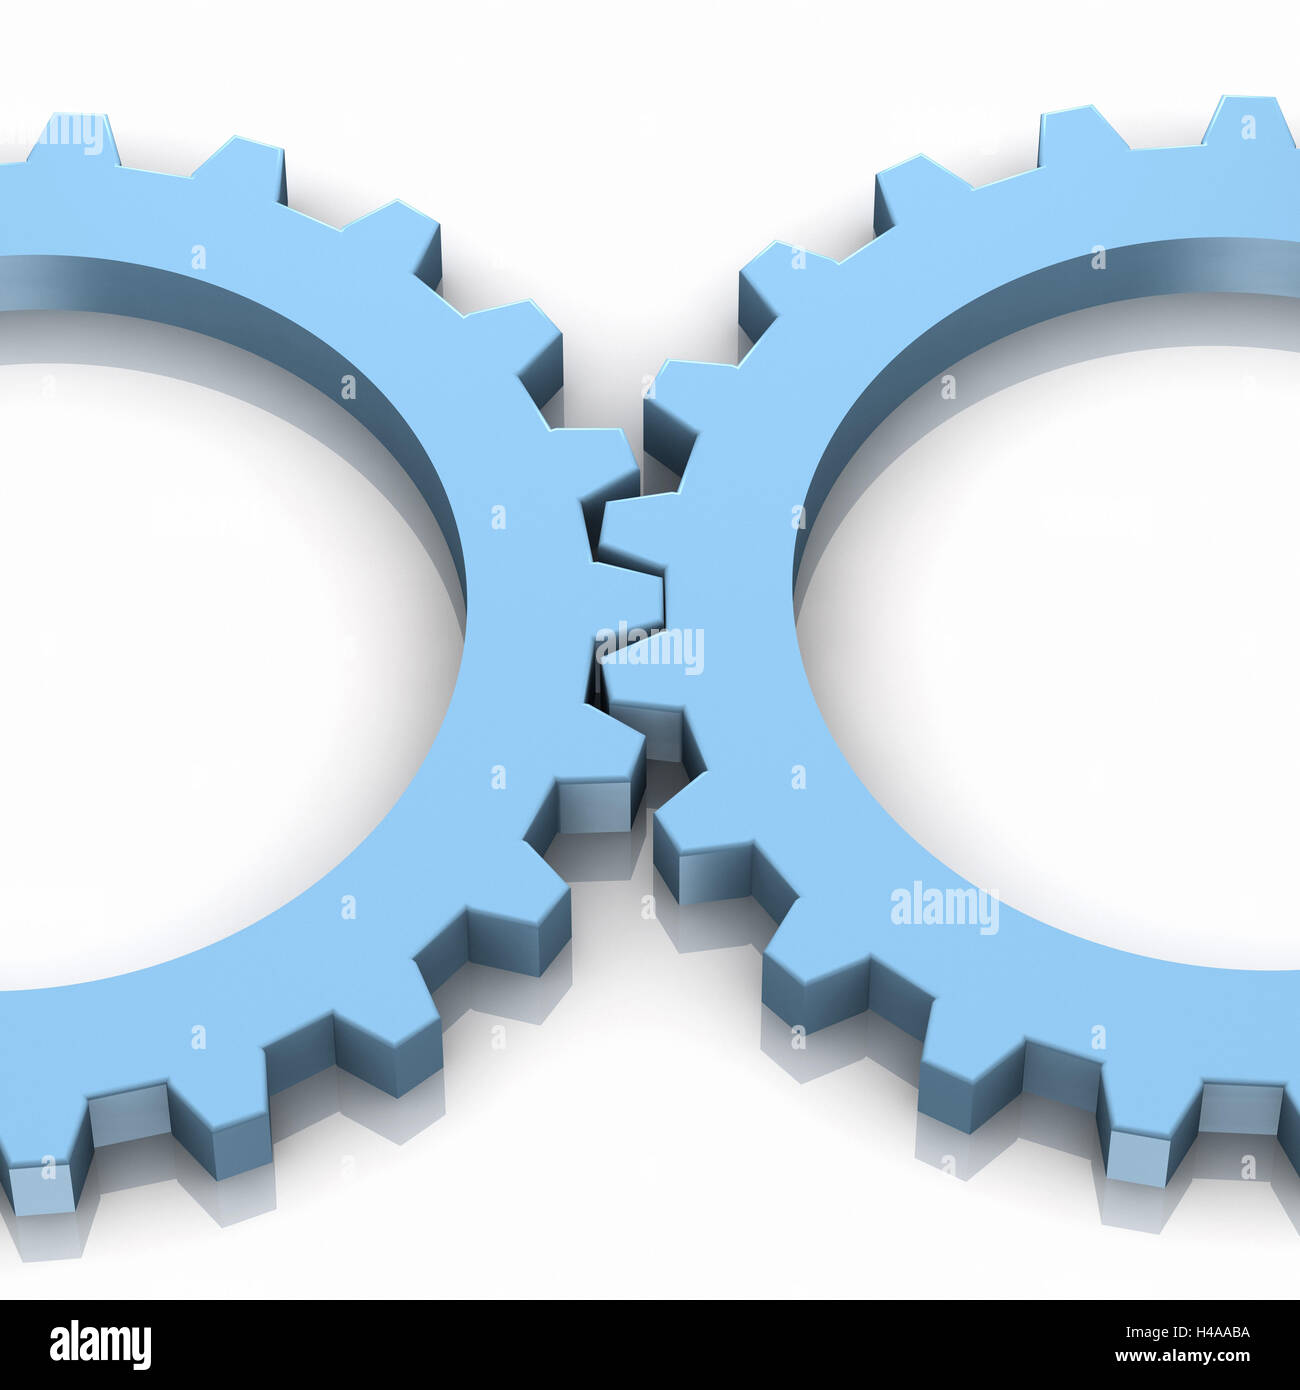 2 blue gear wheels in a row, background white, Stock Photo